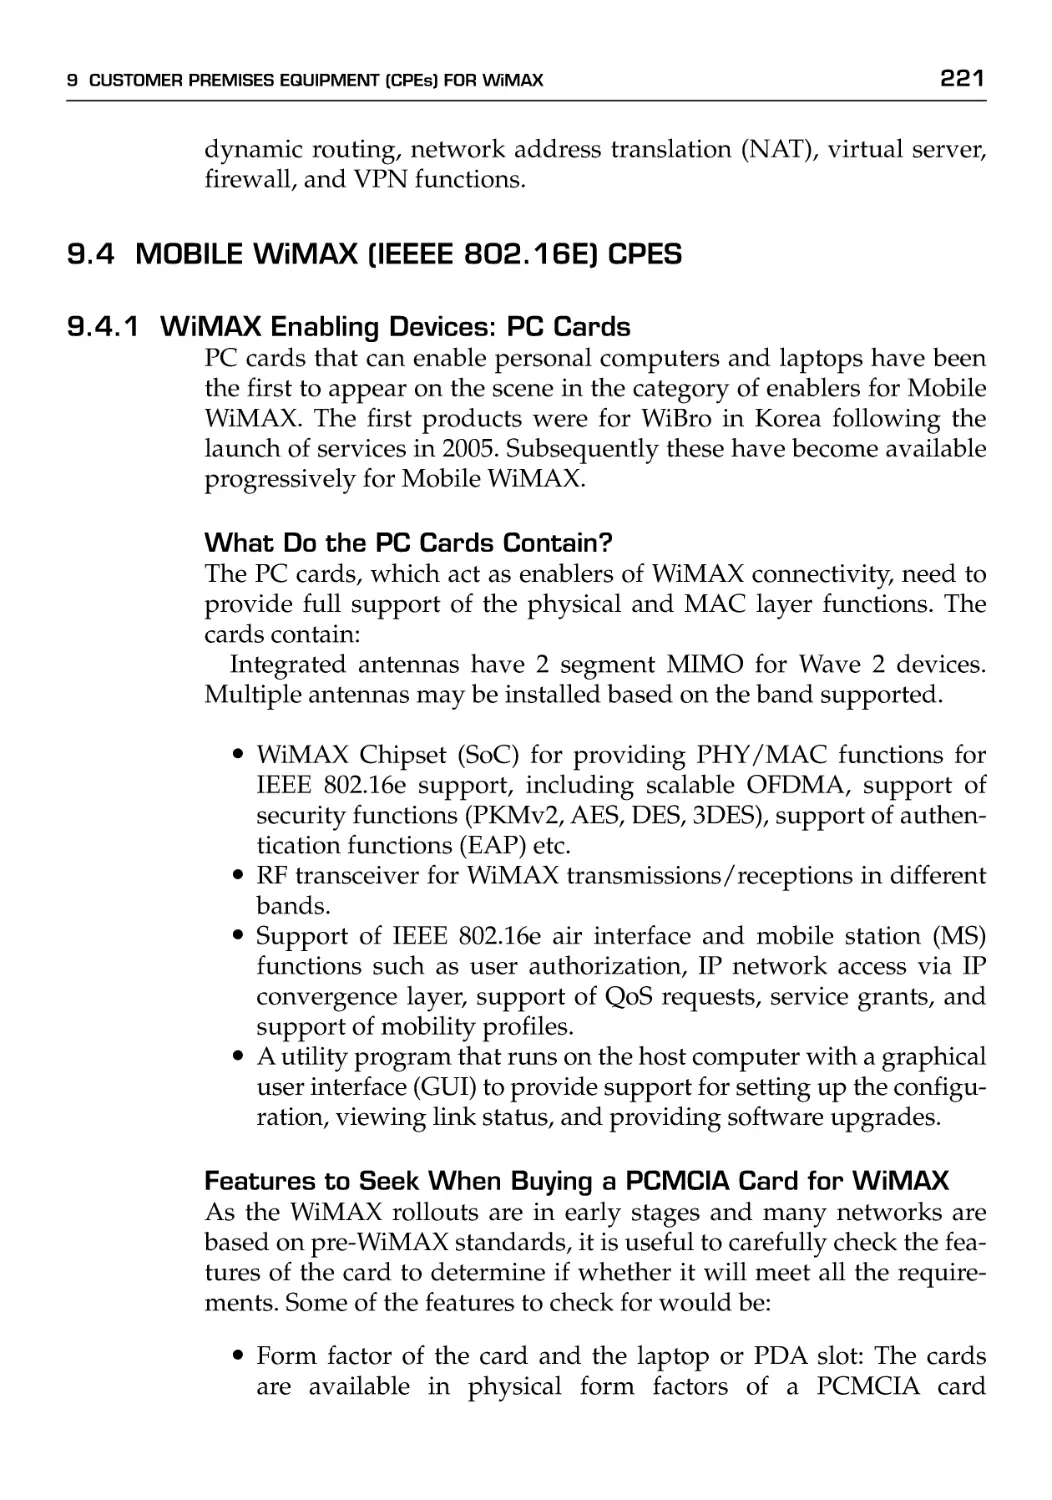 9.4 Mobile WiMAX (IEEEE 802.16e) CPEs